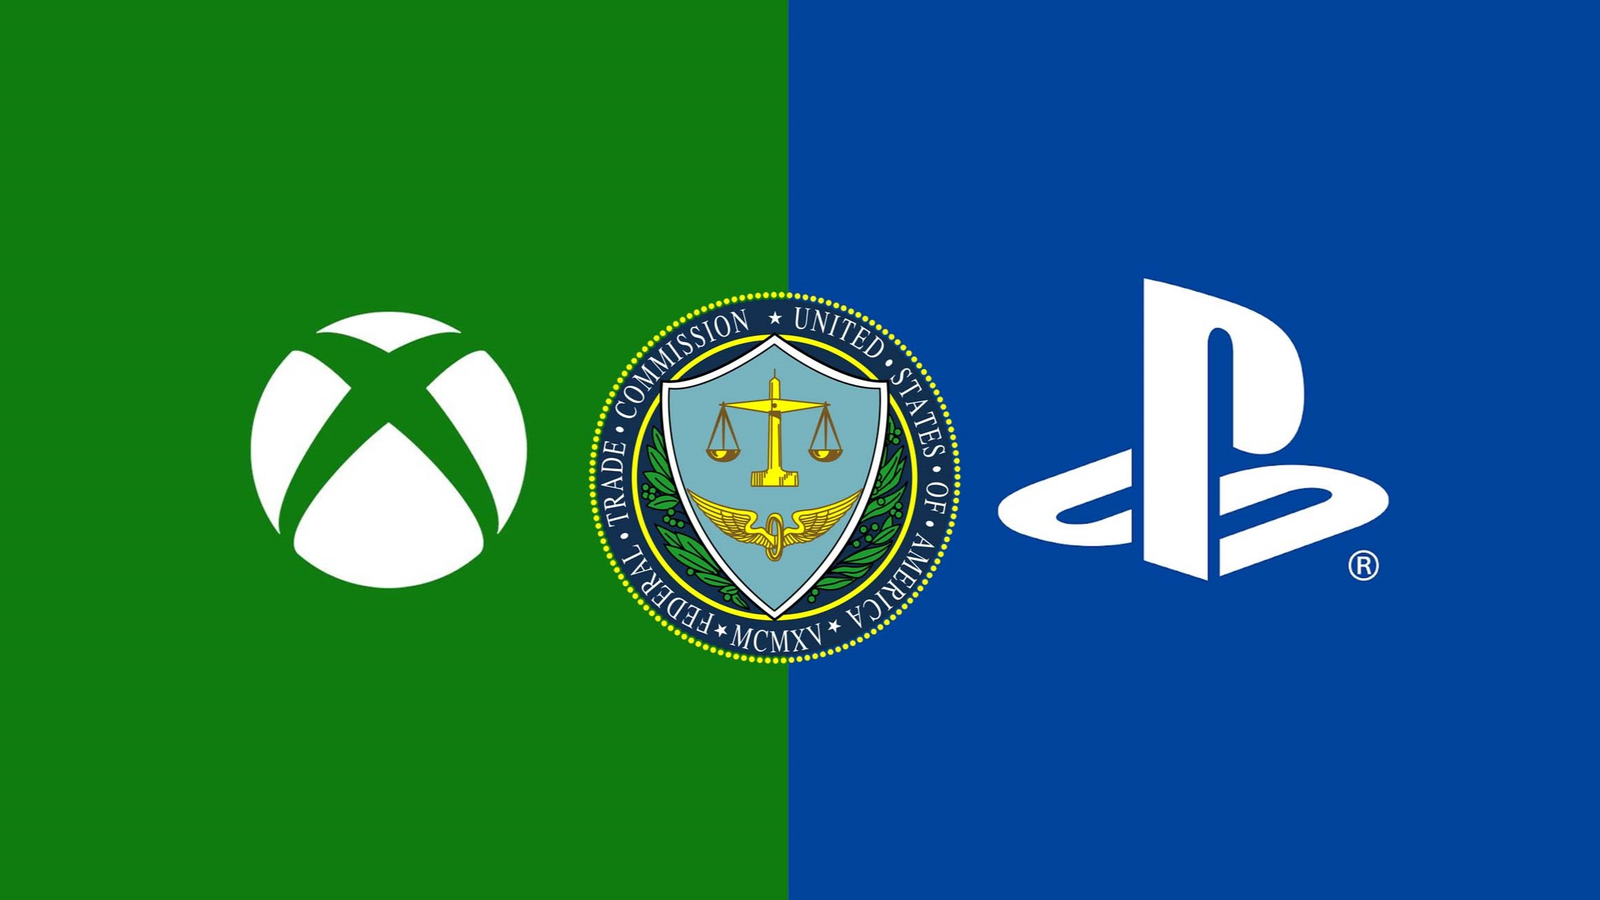 US FTC tries again to stop Microsoft's already-closed deal for Activision